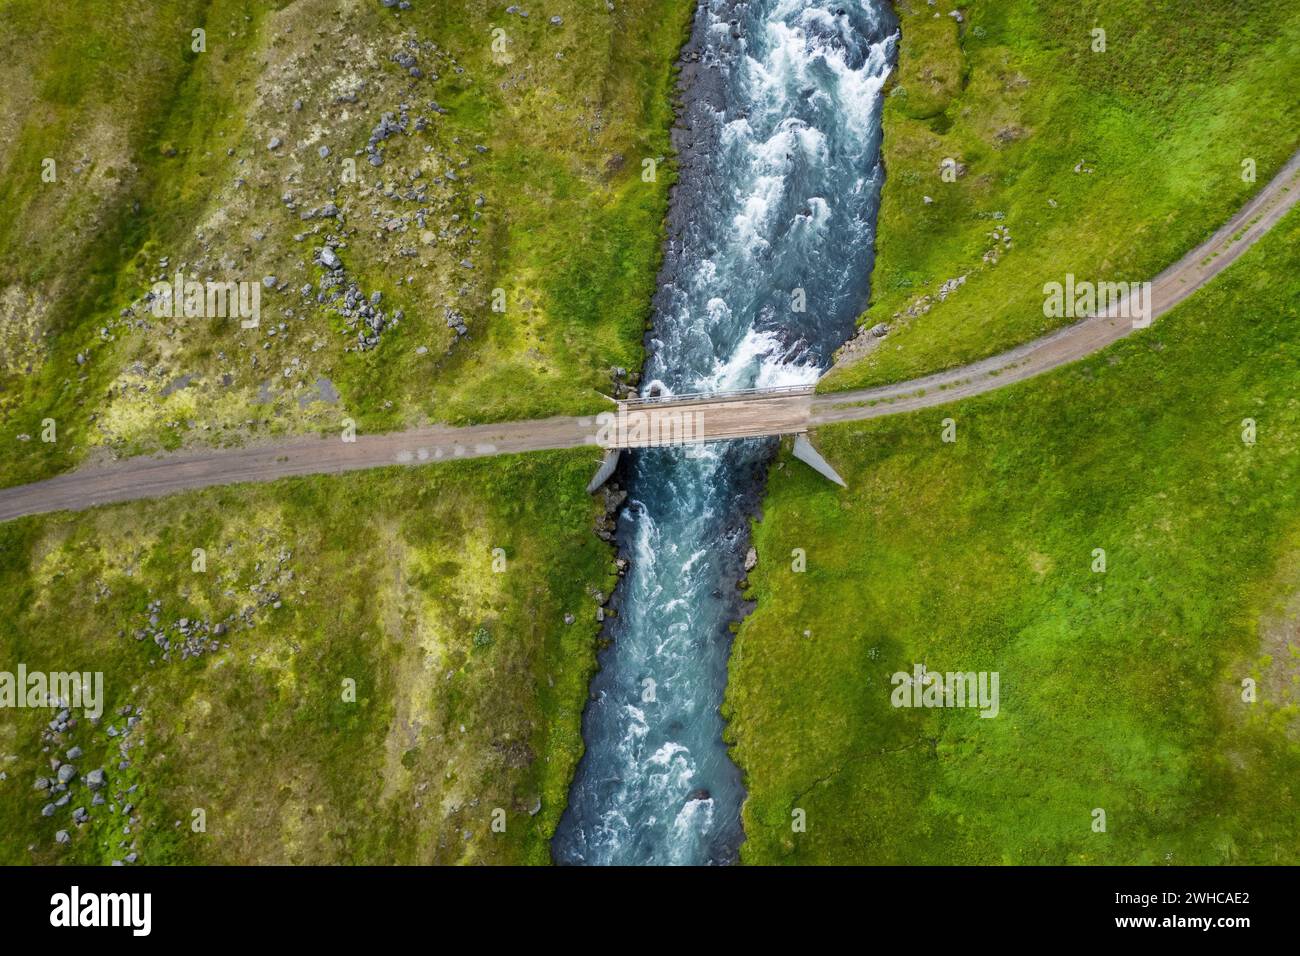 Iceland. Aerial view of road and small bridge over blue mountain river. Aerial scenic view of Iceland landscape. Travel vacation concept. Stock Photo